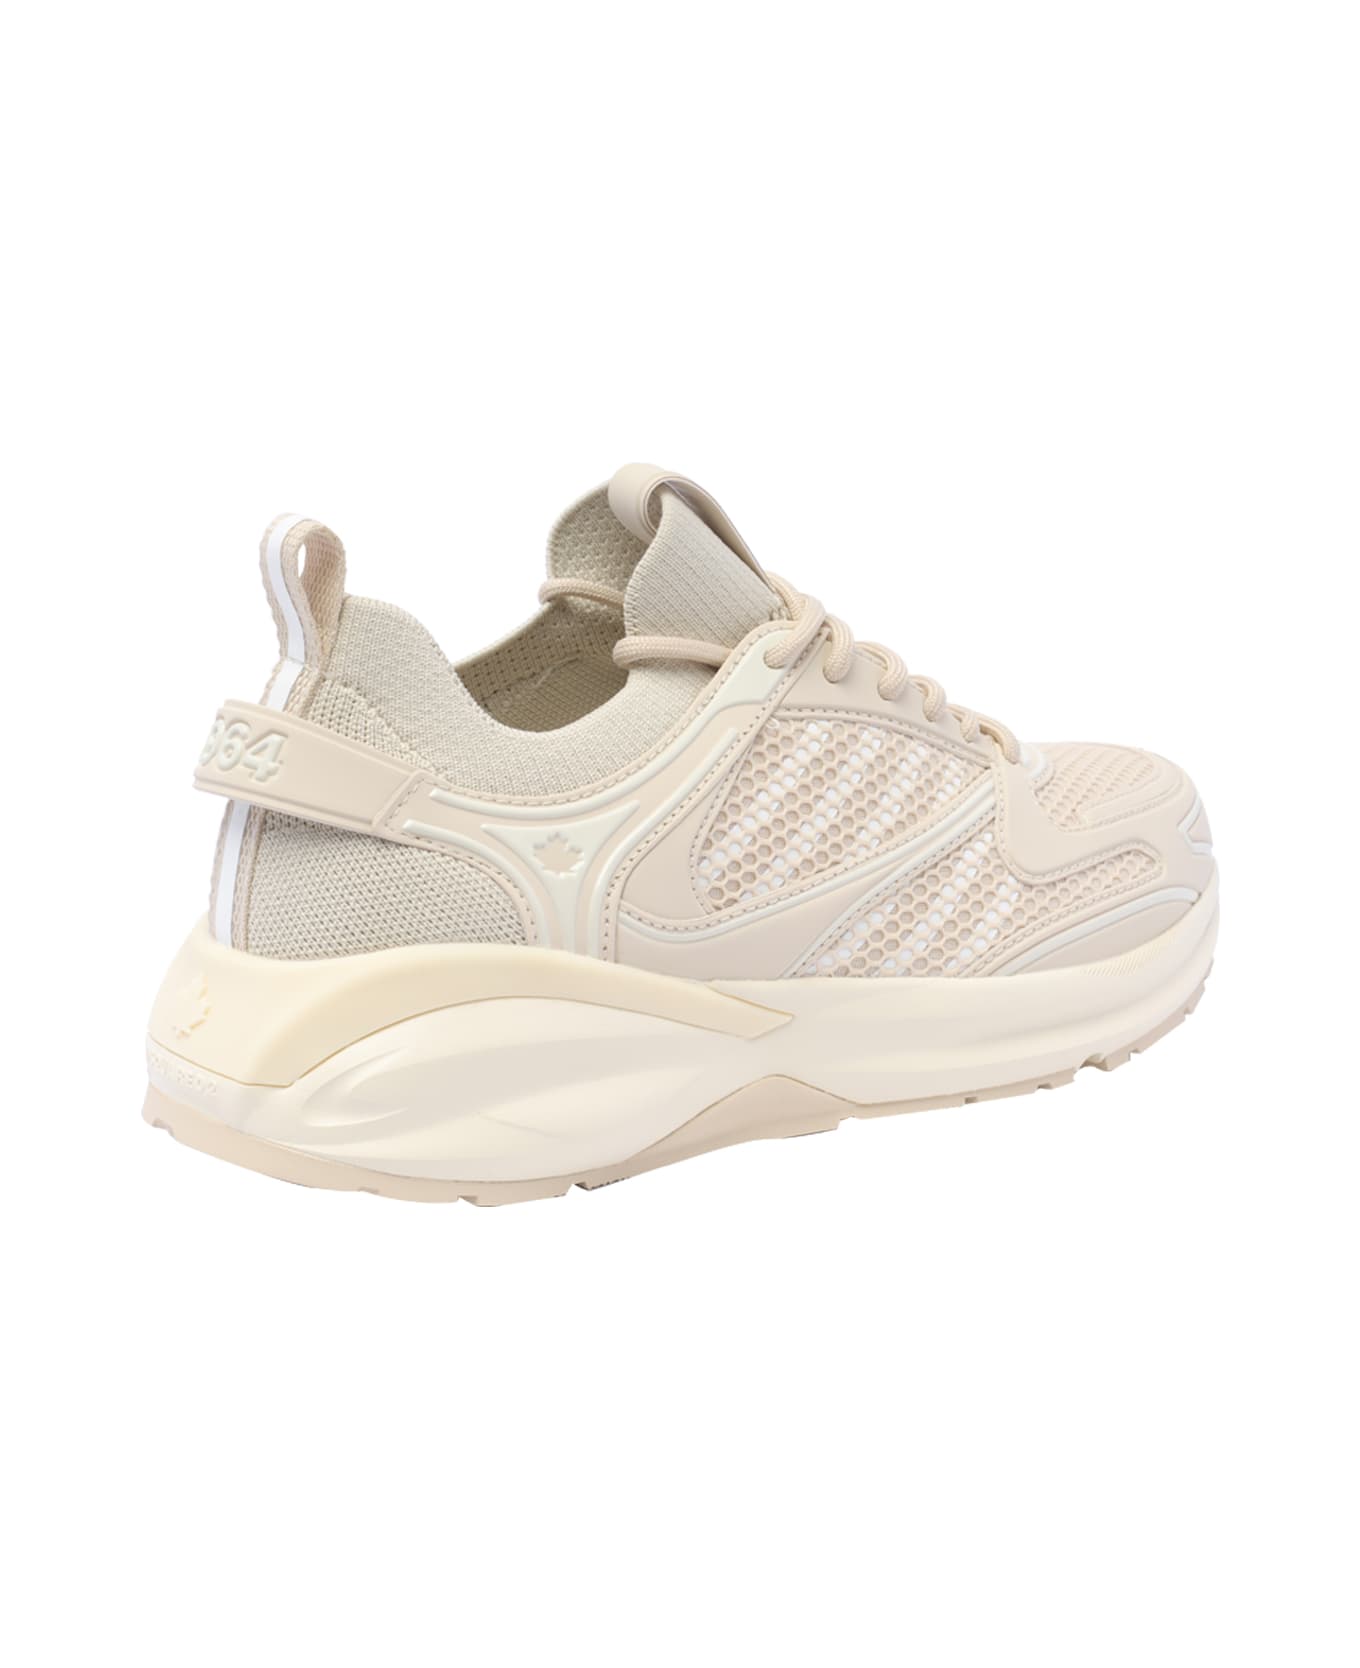 Dsquared2 Mesh Lace-up Sneakers - Beige